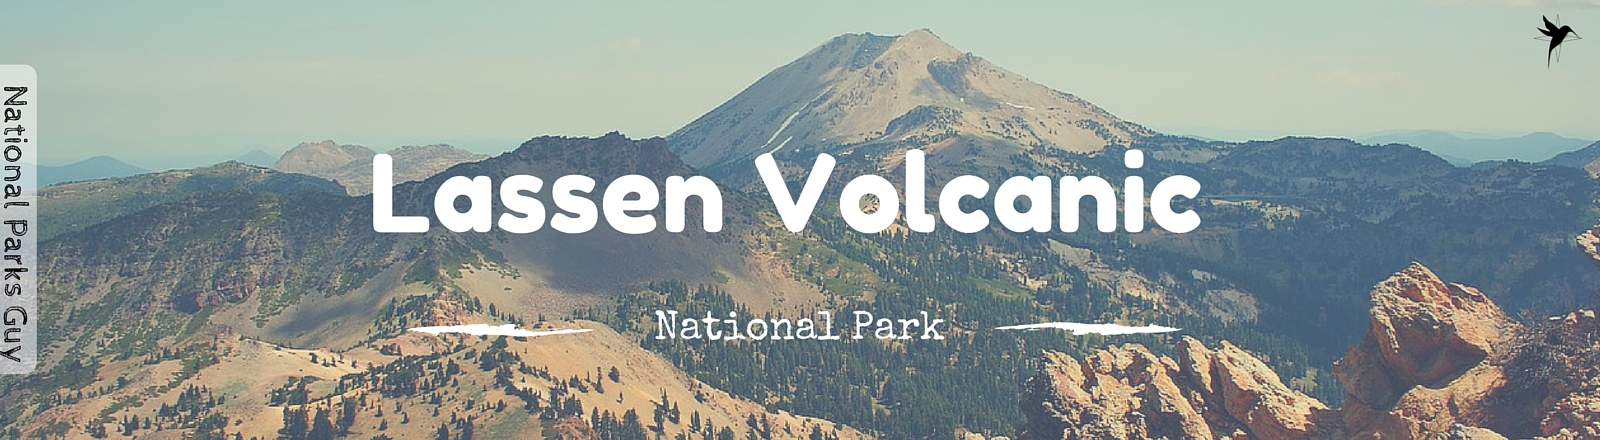 Lassen Valley National Park, USA, National Parks Guy, Stories, Tales, Adventures, Wildlife